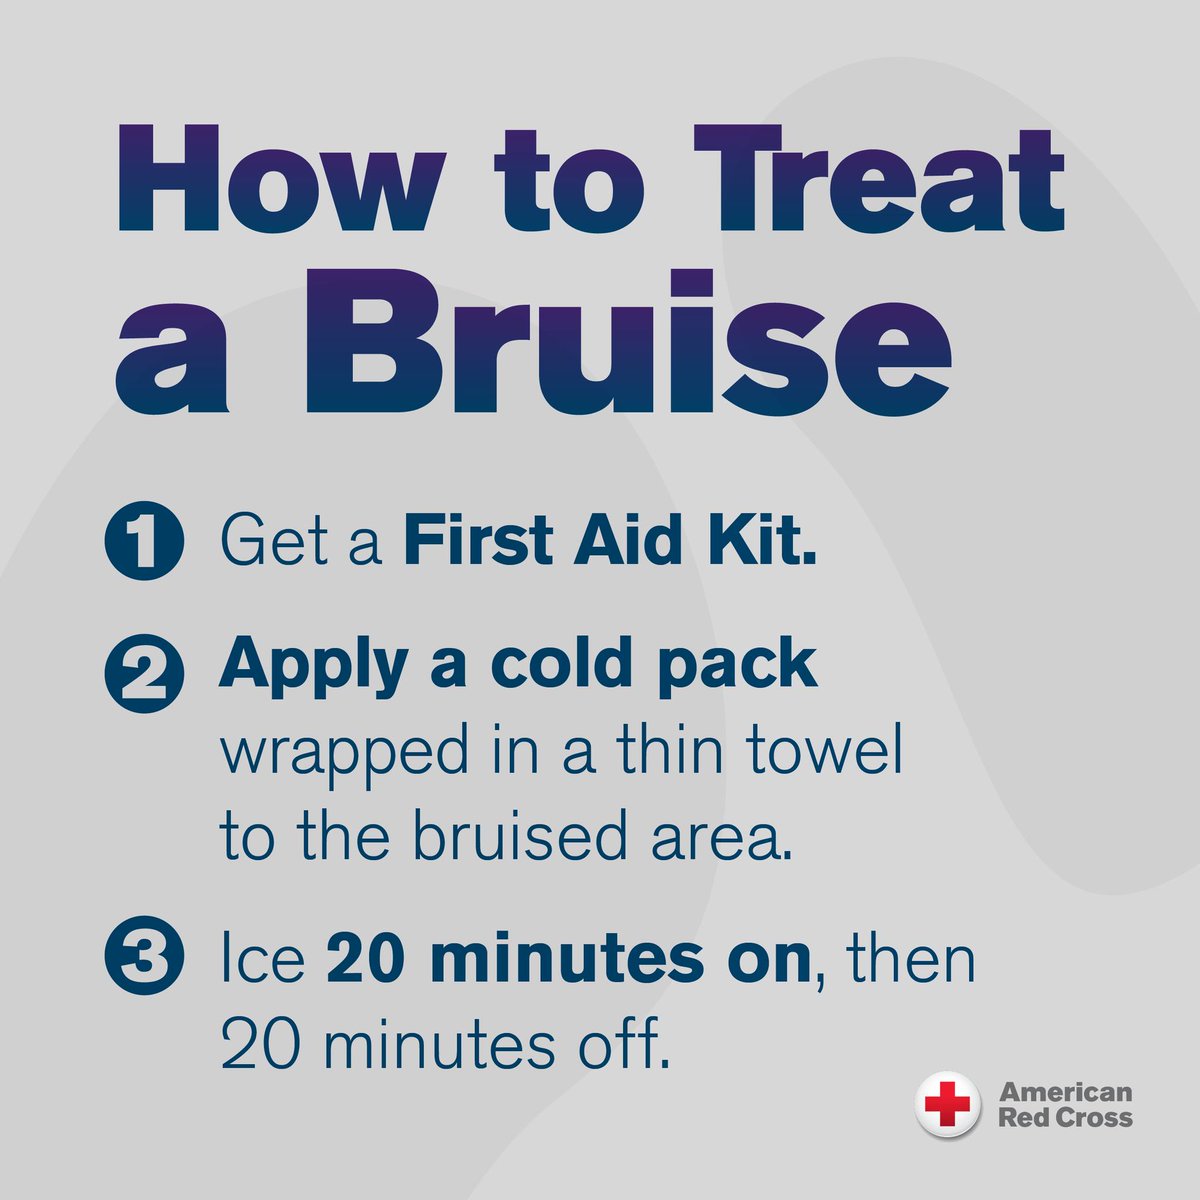 Do you know how to treat a bruise? Here are a few tips on the best ways to do so: 1️⃣ Get a First Aid Kit. 2️⃣ Apply a cold pack wrapped in a thin towel to the bruised area. 3️⃣ Ice 20 minutes on, then 20 minutes off.